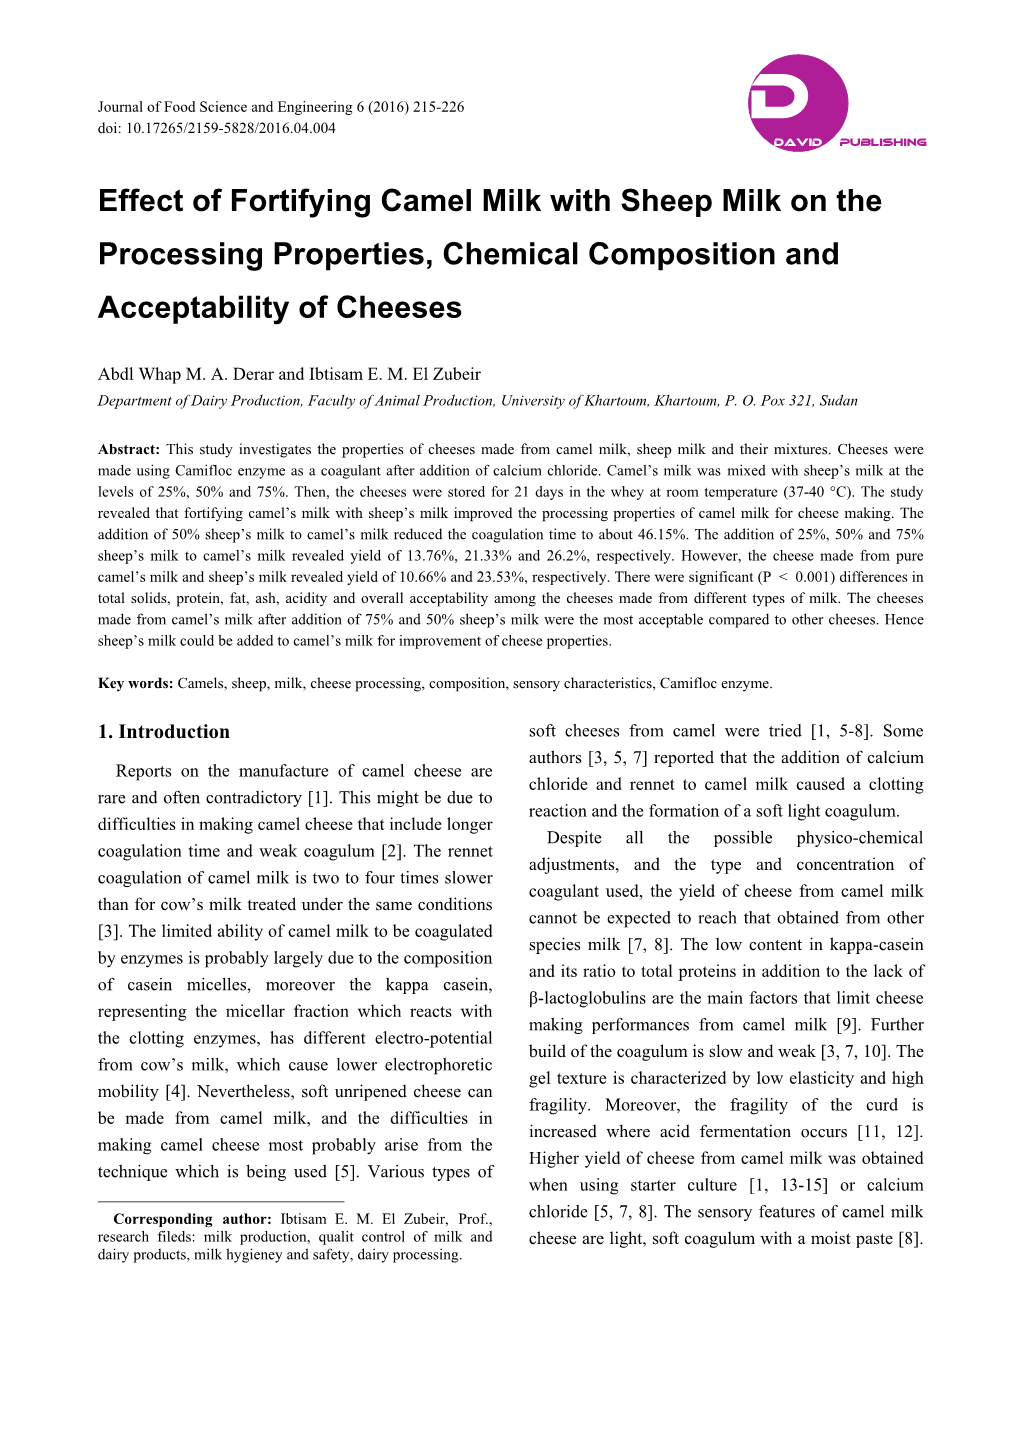 Effect of Fortifying Camel Milk with Sheep Milk on the Processing Properties, Chemical Composition and Acceptability of Cheeses